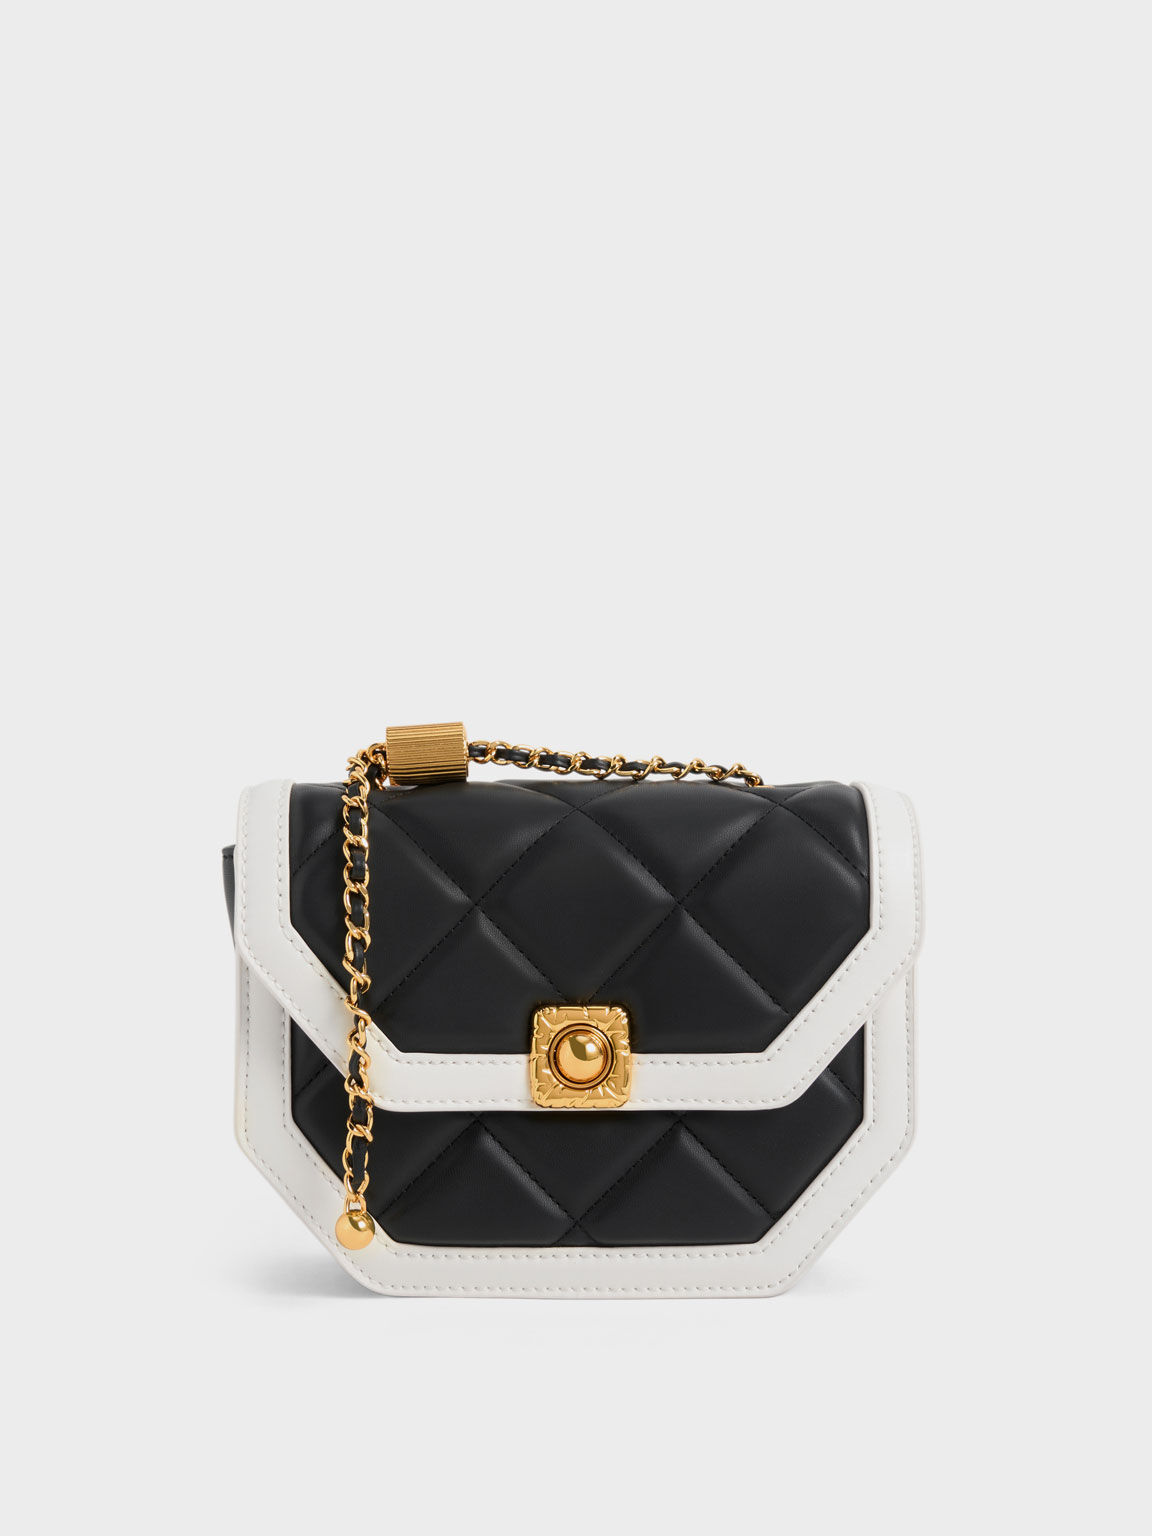 Chanel 22 Bag: The Hottest Accessory of the Season or a Passing